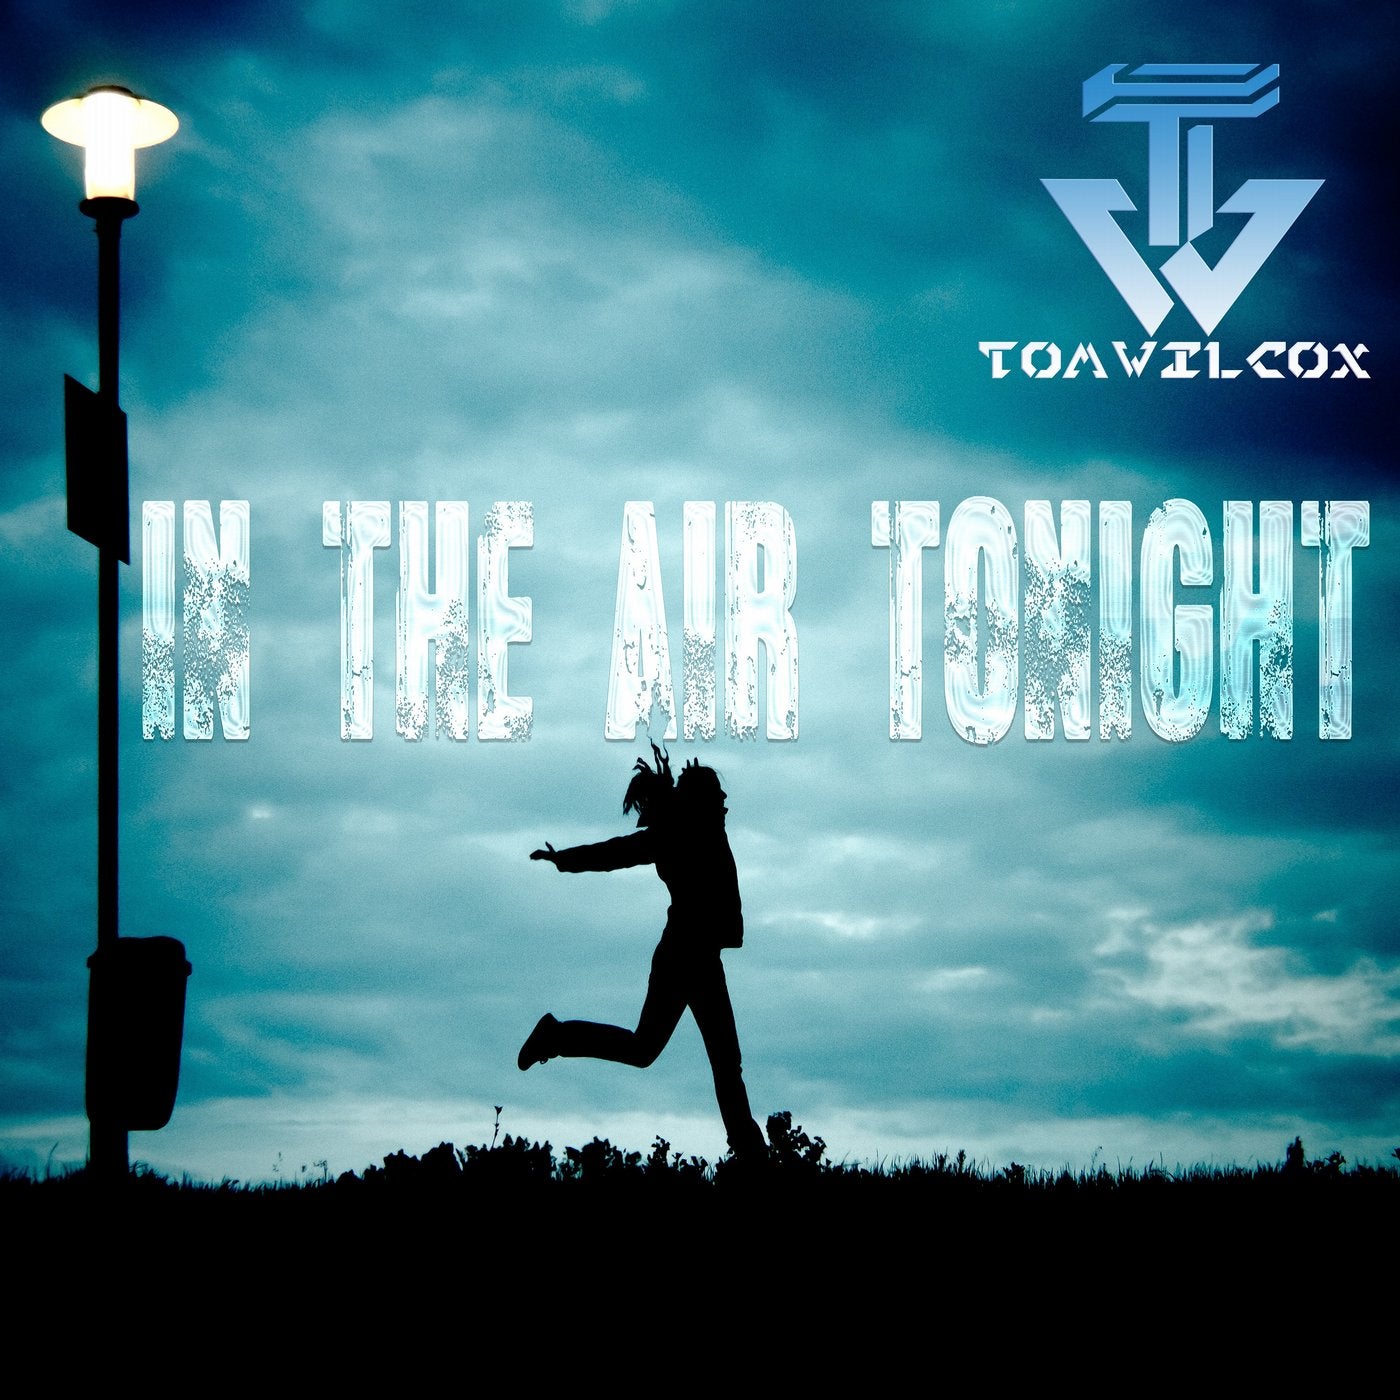 In the Air Tonight